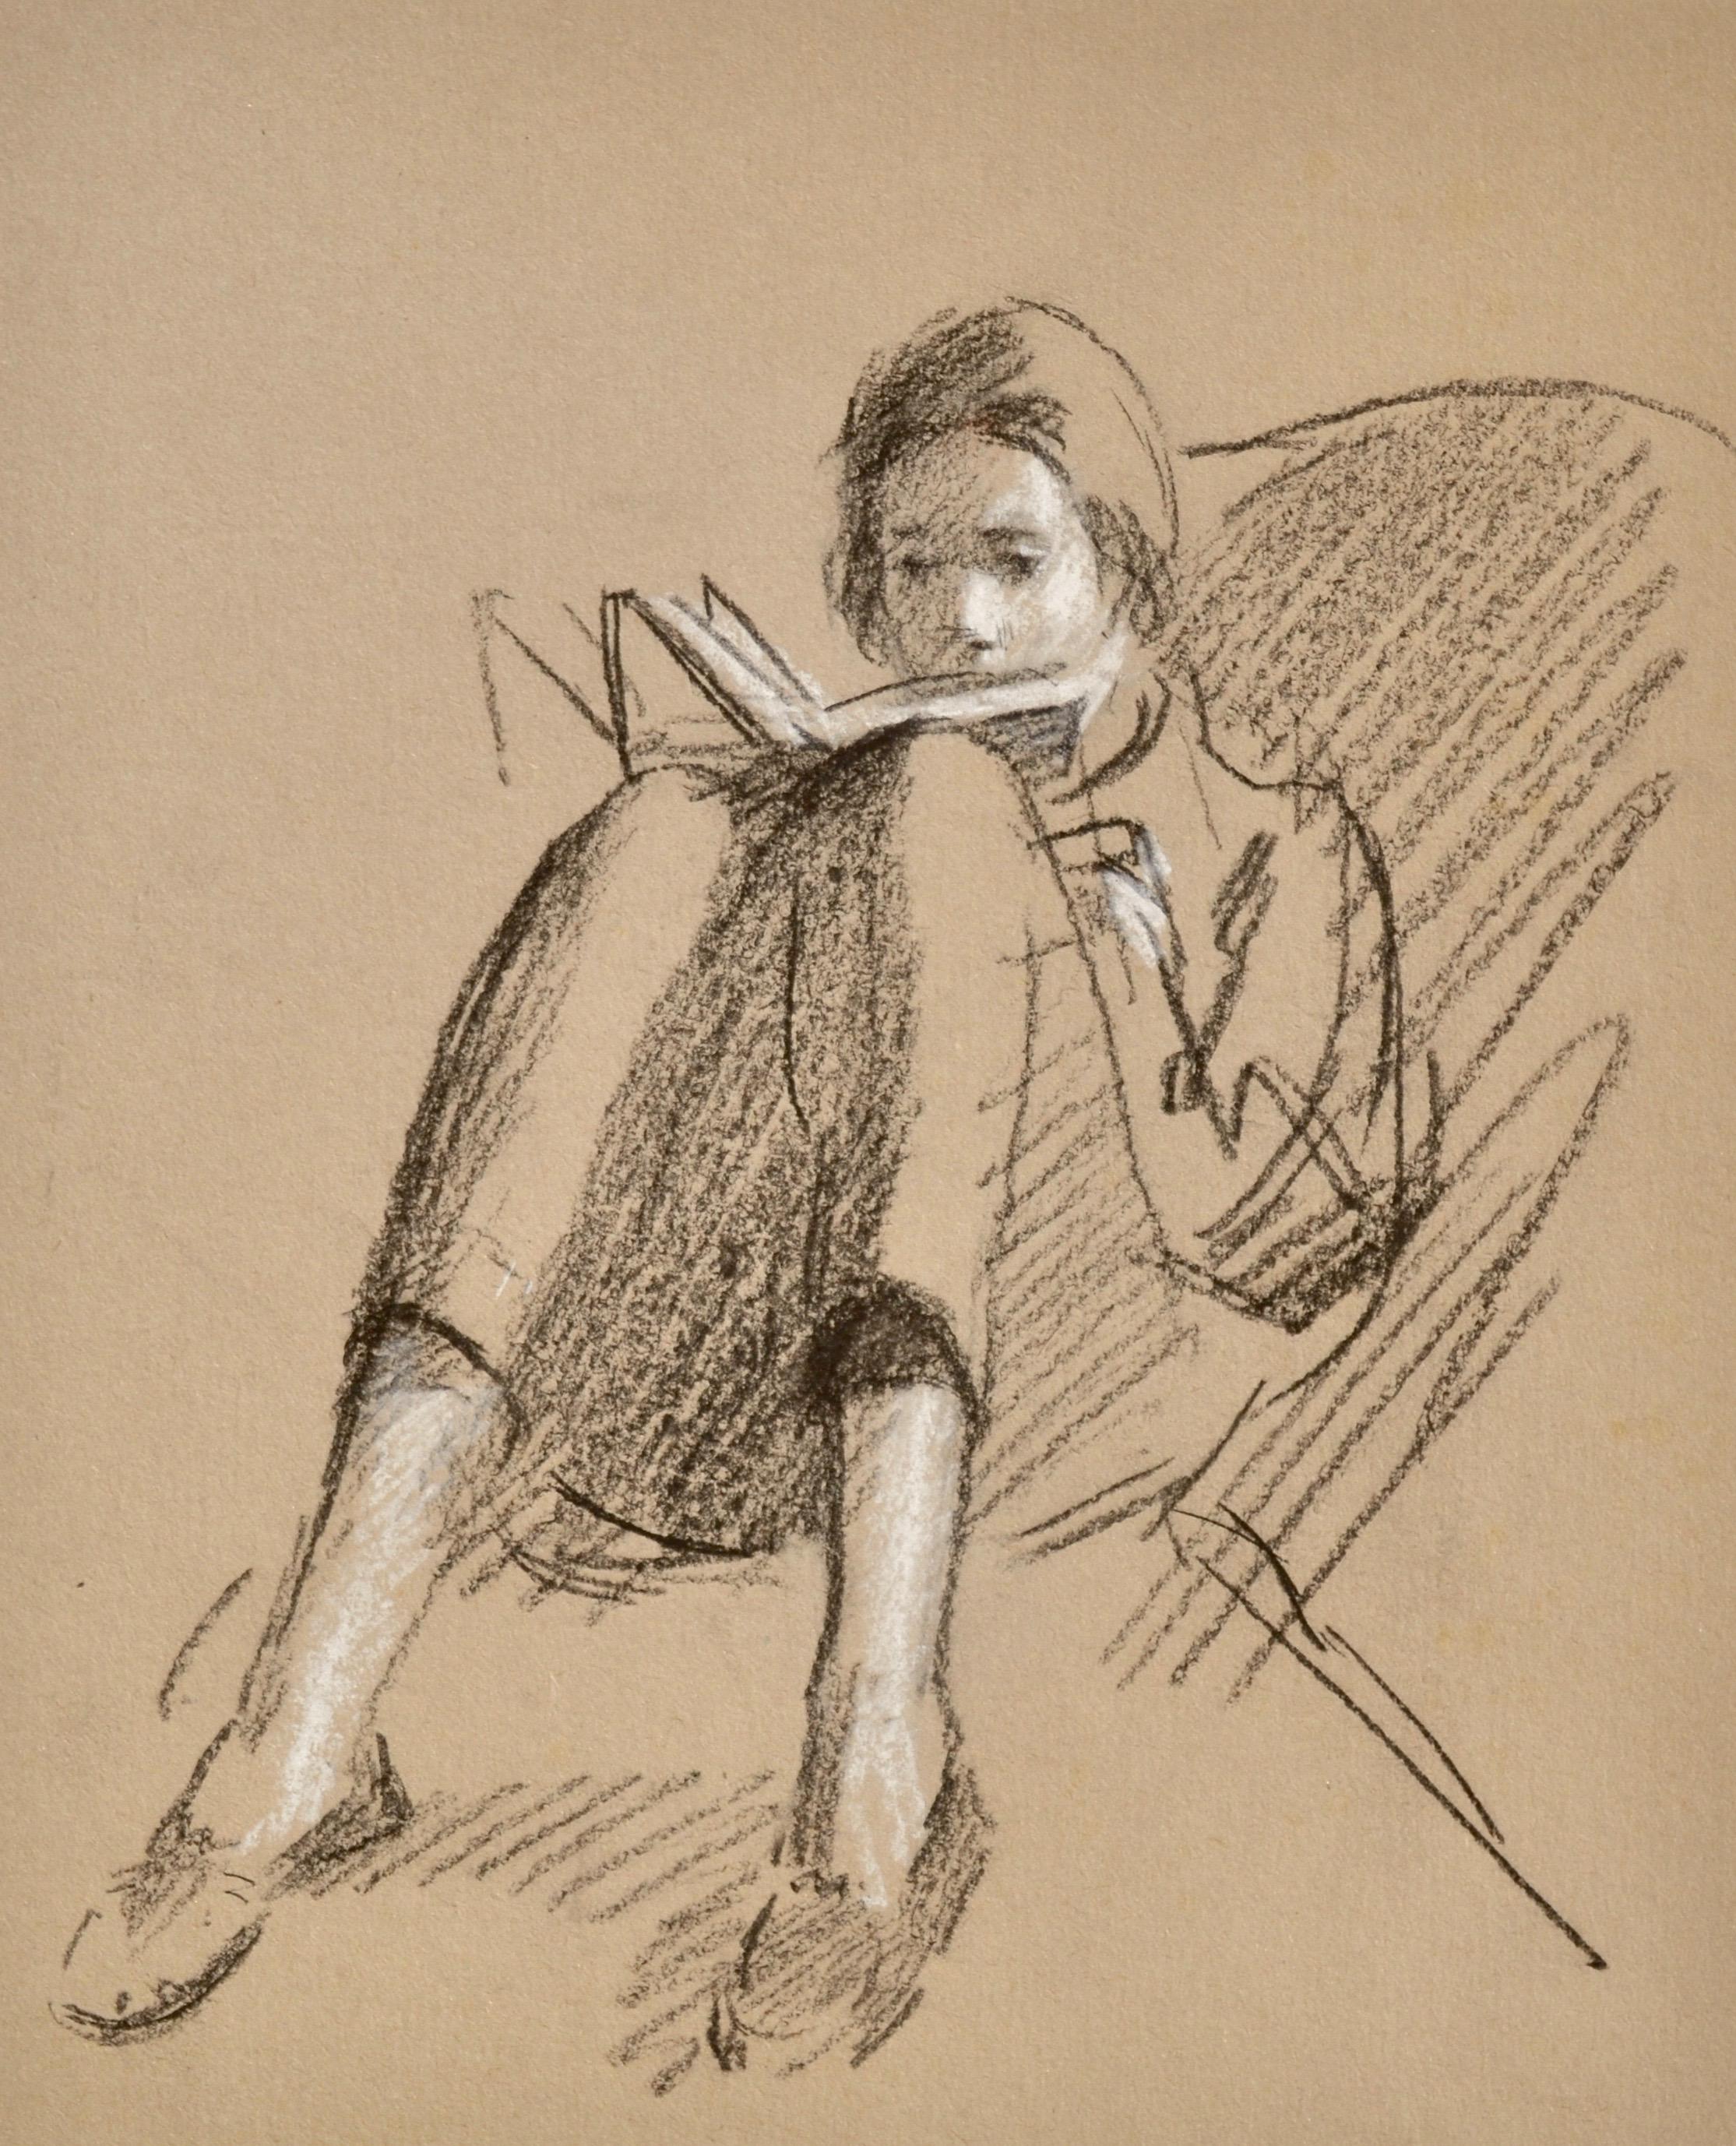 JOHN SERGEANT
(1937-2010)

Reading

Black and white chalk on buff paper, unframed

27.5 by 22.5 cm., 10 ¾ by 9 in.
(mount size 44.5 by 38 cm., 17 �½ by 15 in.)

Sergeant was born in London, the son of a civil servant.  His family soon moved to